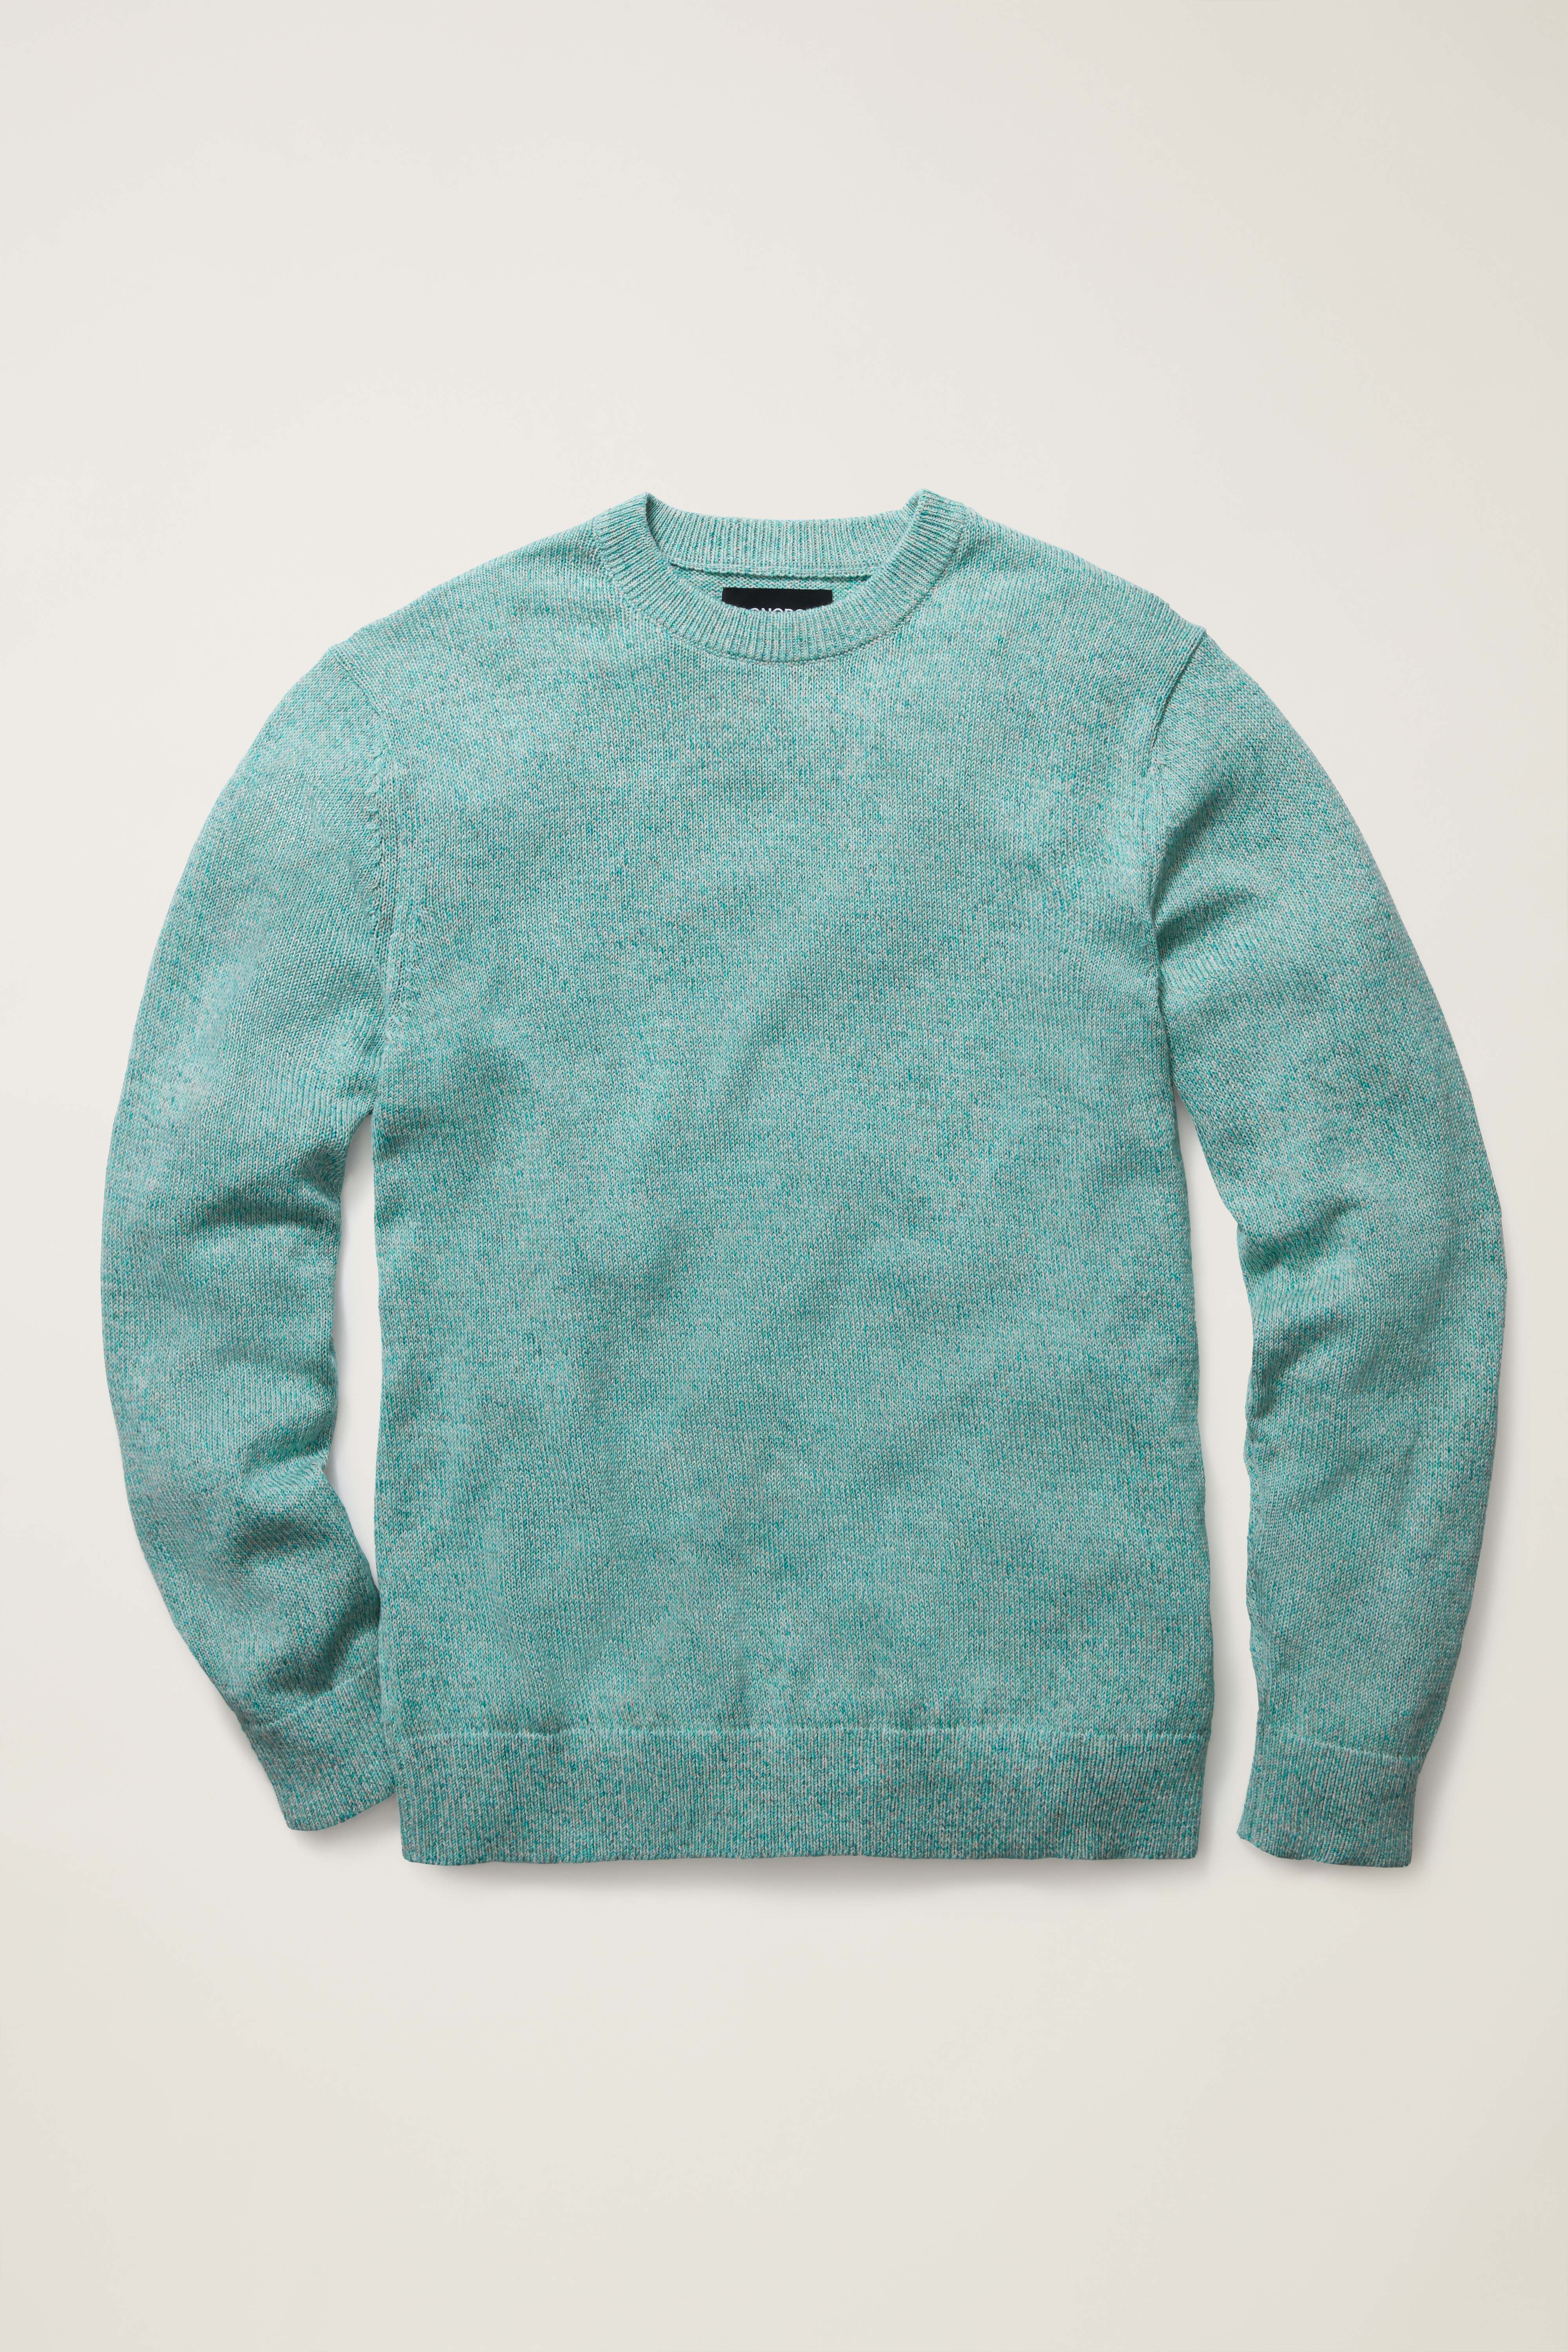 Limited Edition Crew Neck Sweater